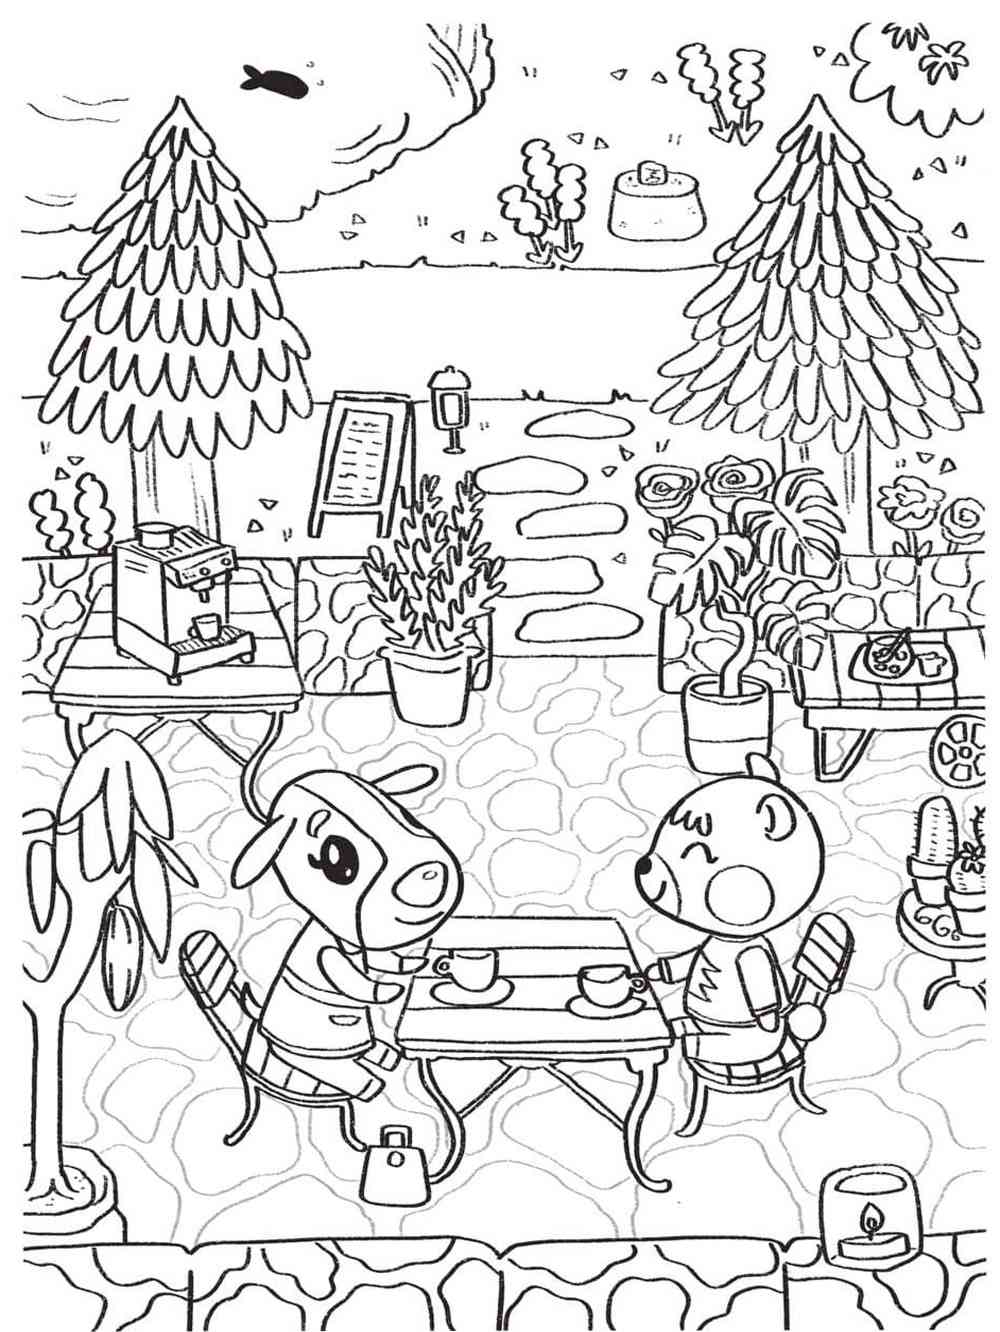 Animal Crossing sitting in a cafe coloring page